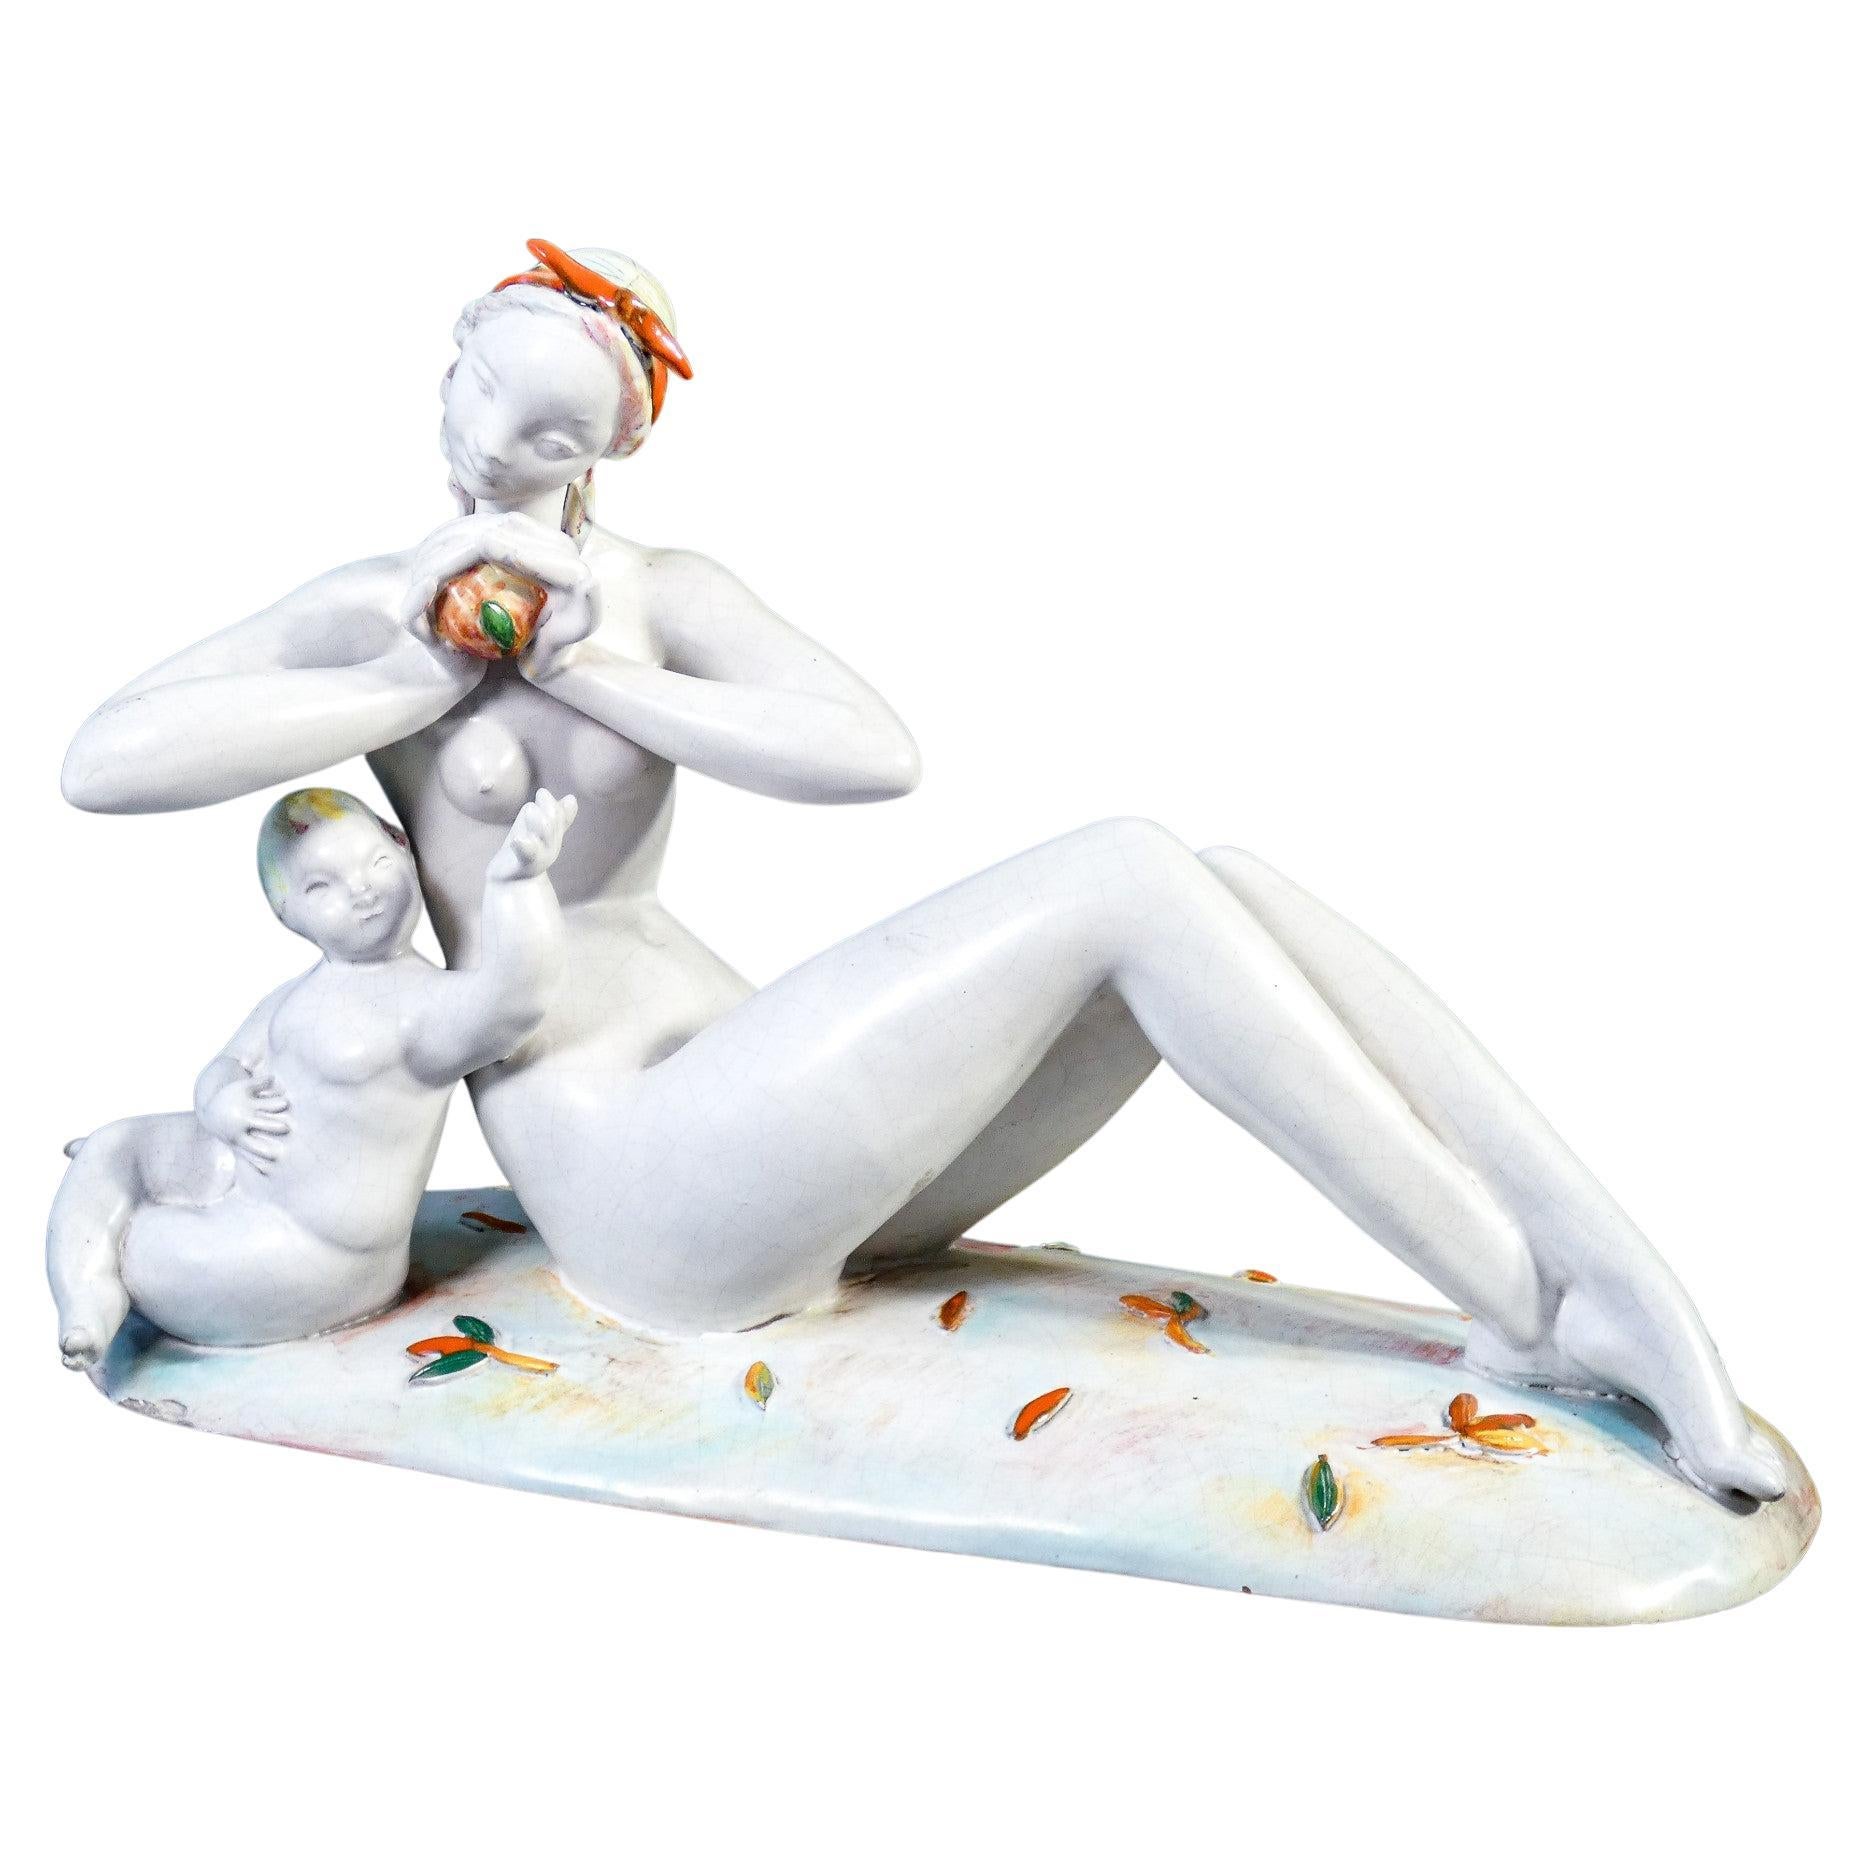 Ceramic Sculpture "Nude Woman with Child" by Eugenio Pattarino, Italy, 1920s For Sale